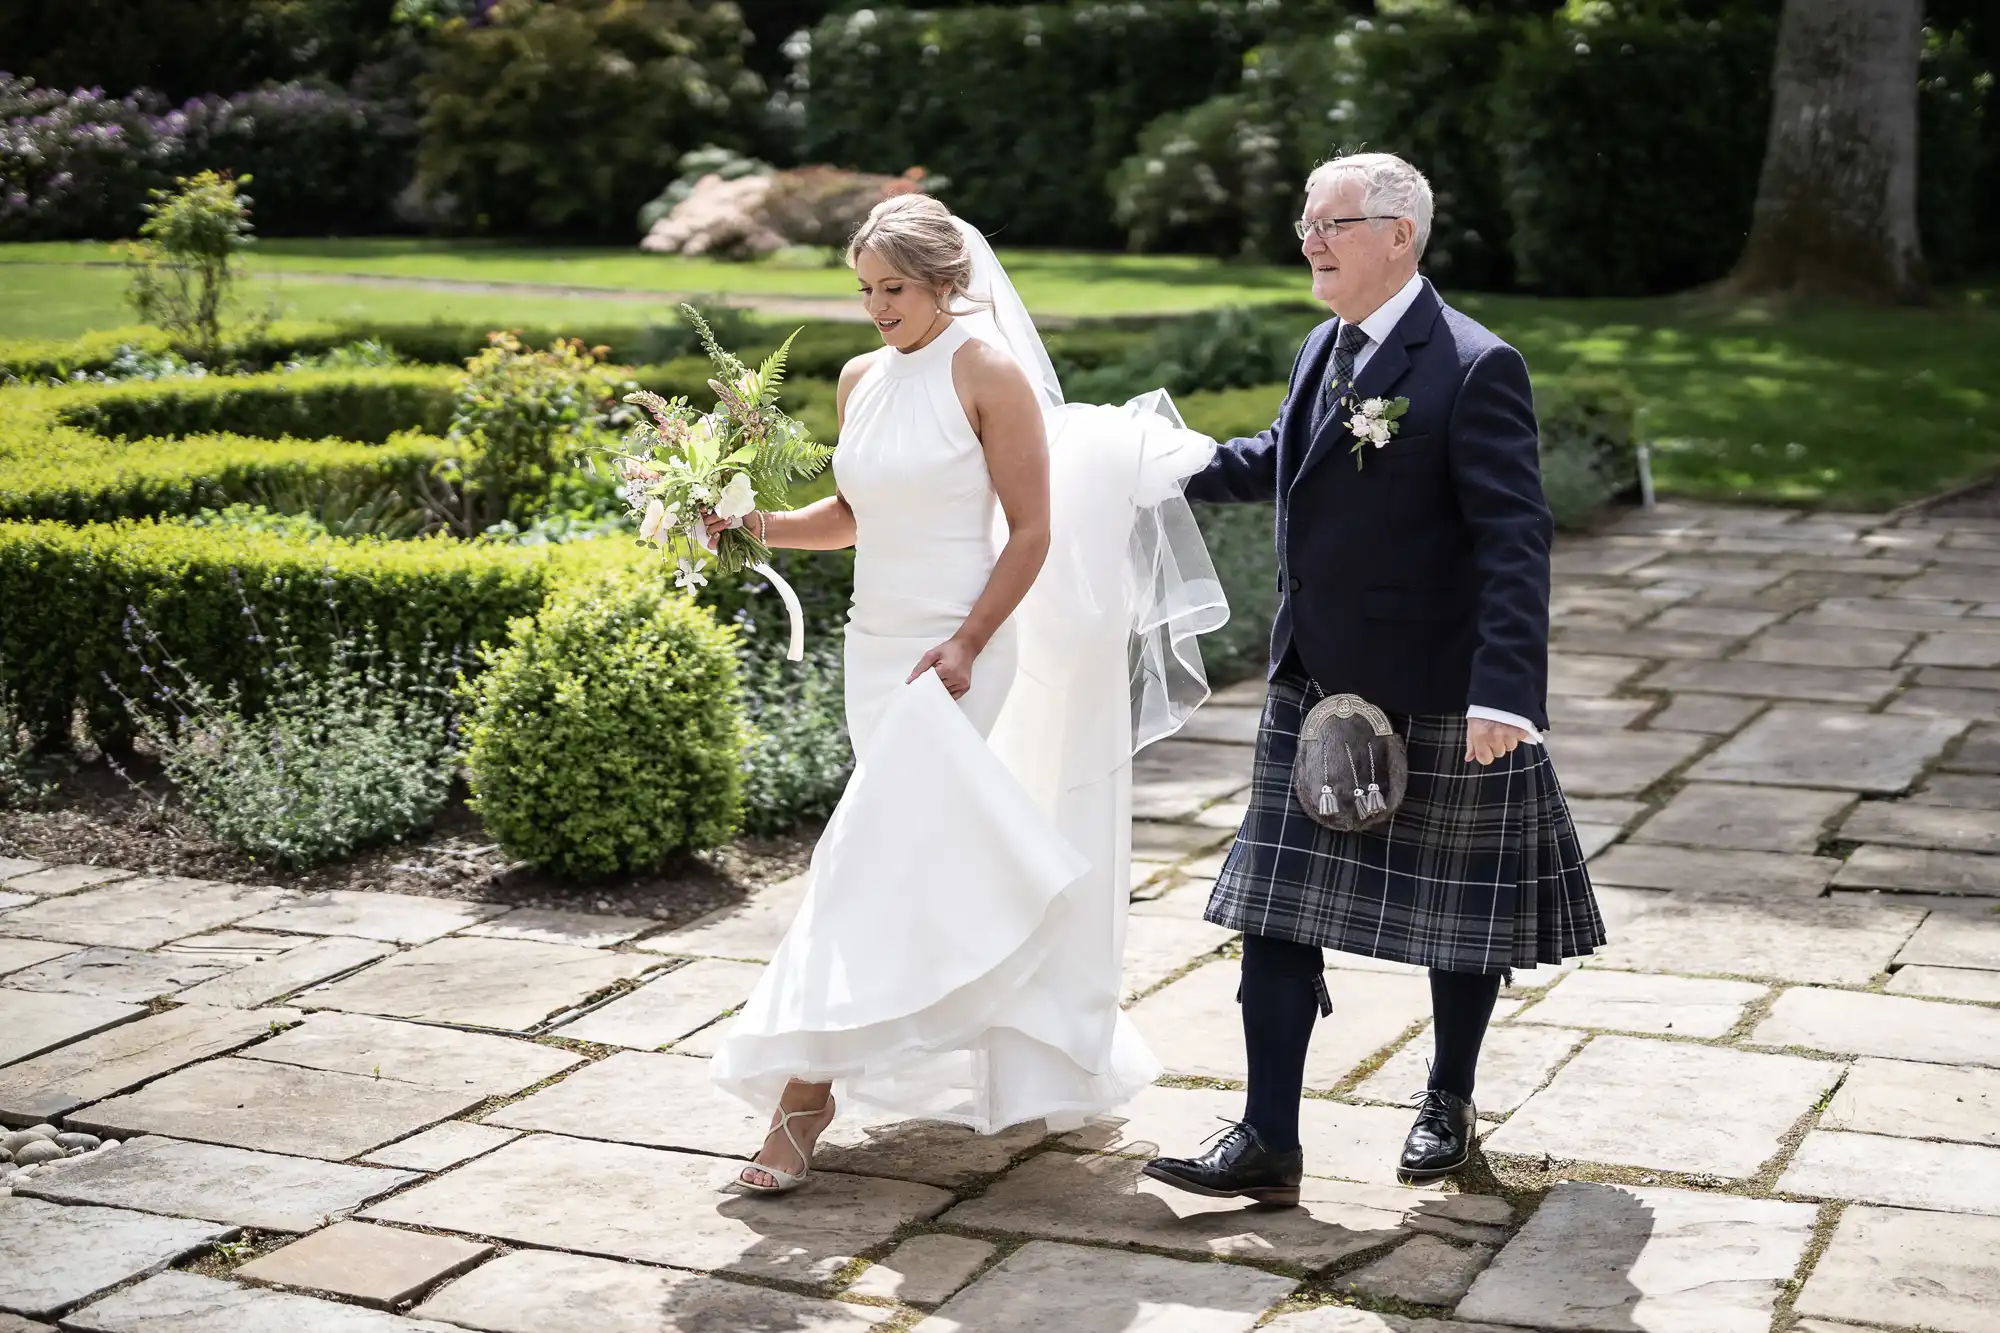 A bride and her father walking in a garden, the father wearing a kilt and the bride holding a bouquet.